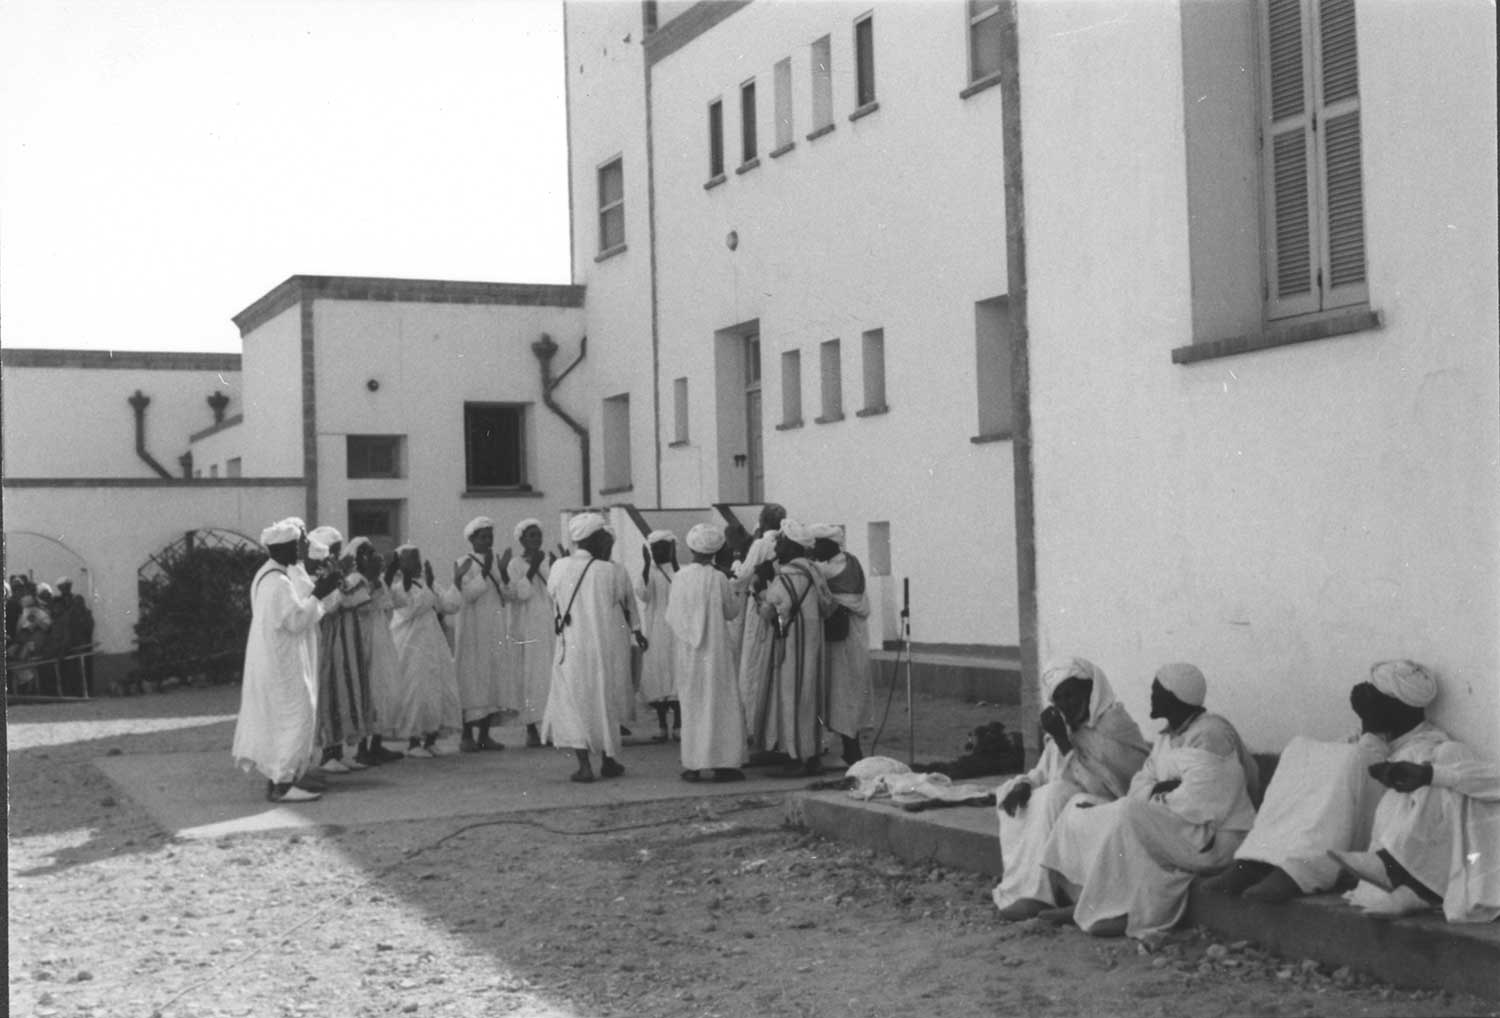 Performers group together in Essaouira, Morocco